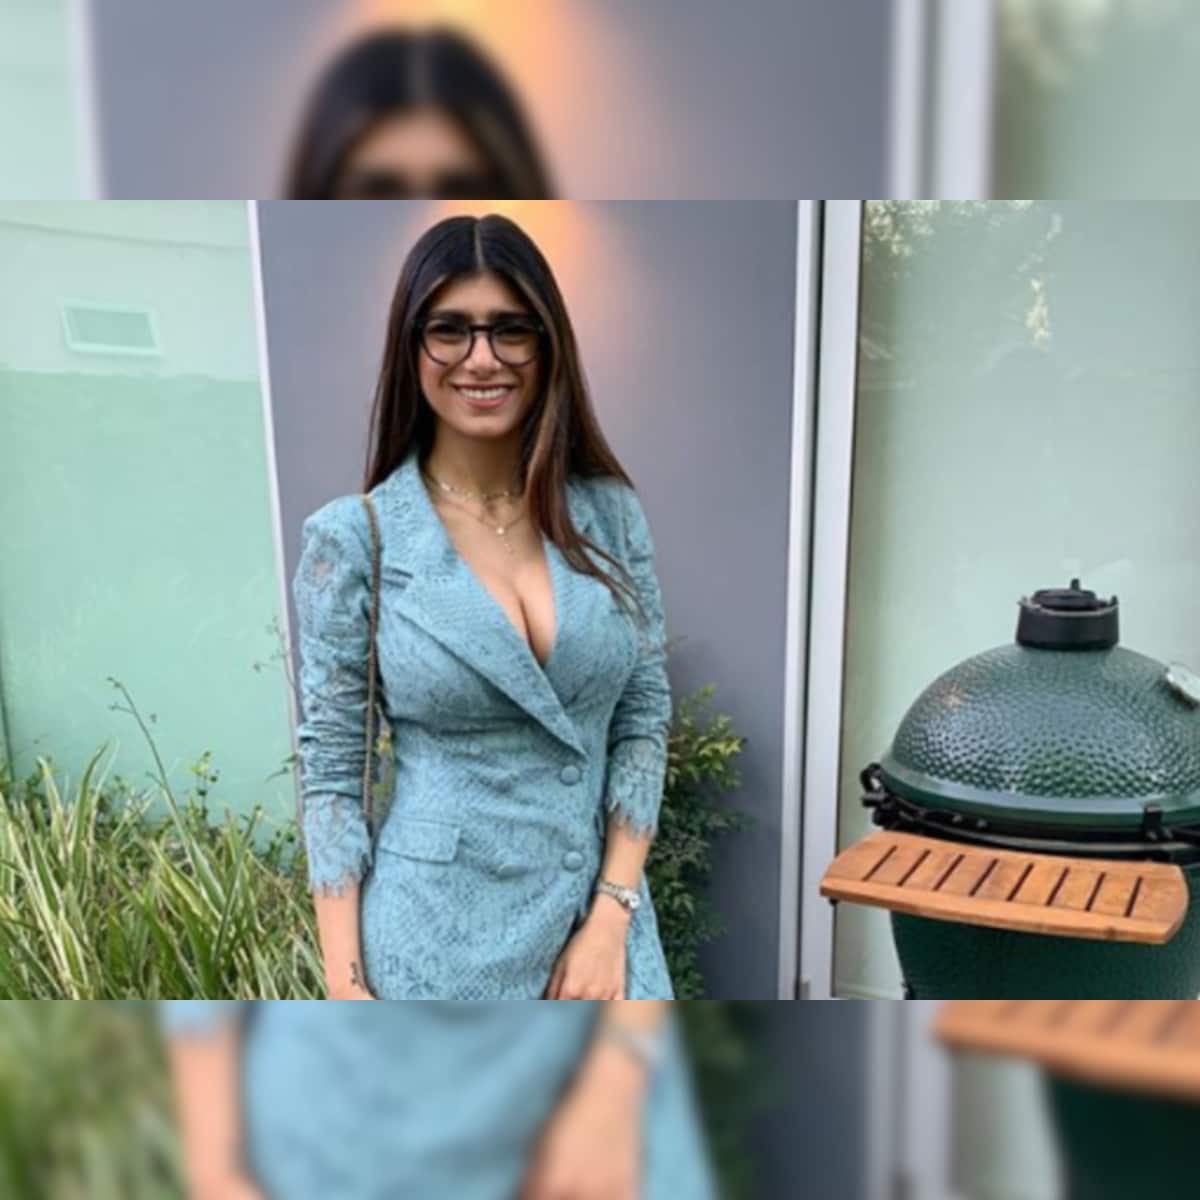 Kareena Ki Chut - Mia Khalifa Reveals That She Only Made a Total of Rs 8.5 Lakhs in the Adult  Film Industry